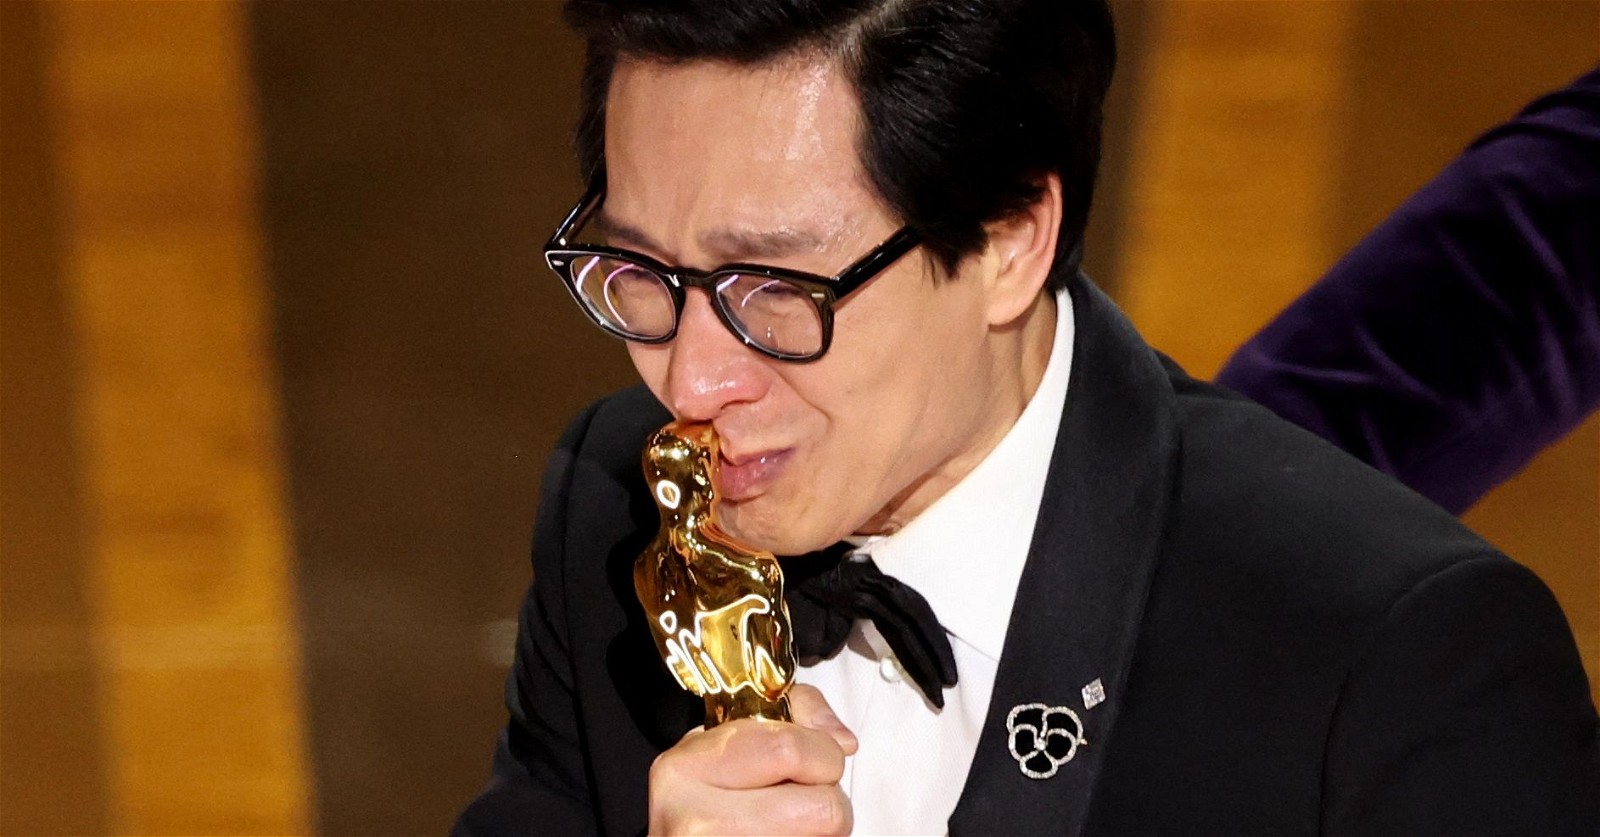 Ke Huy Quan wins Oscar for Best Supporting Actor